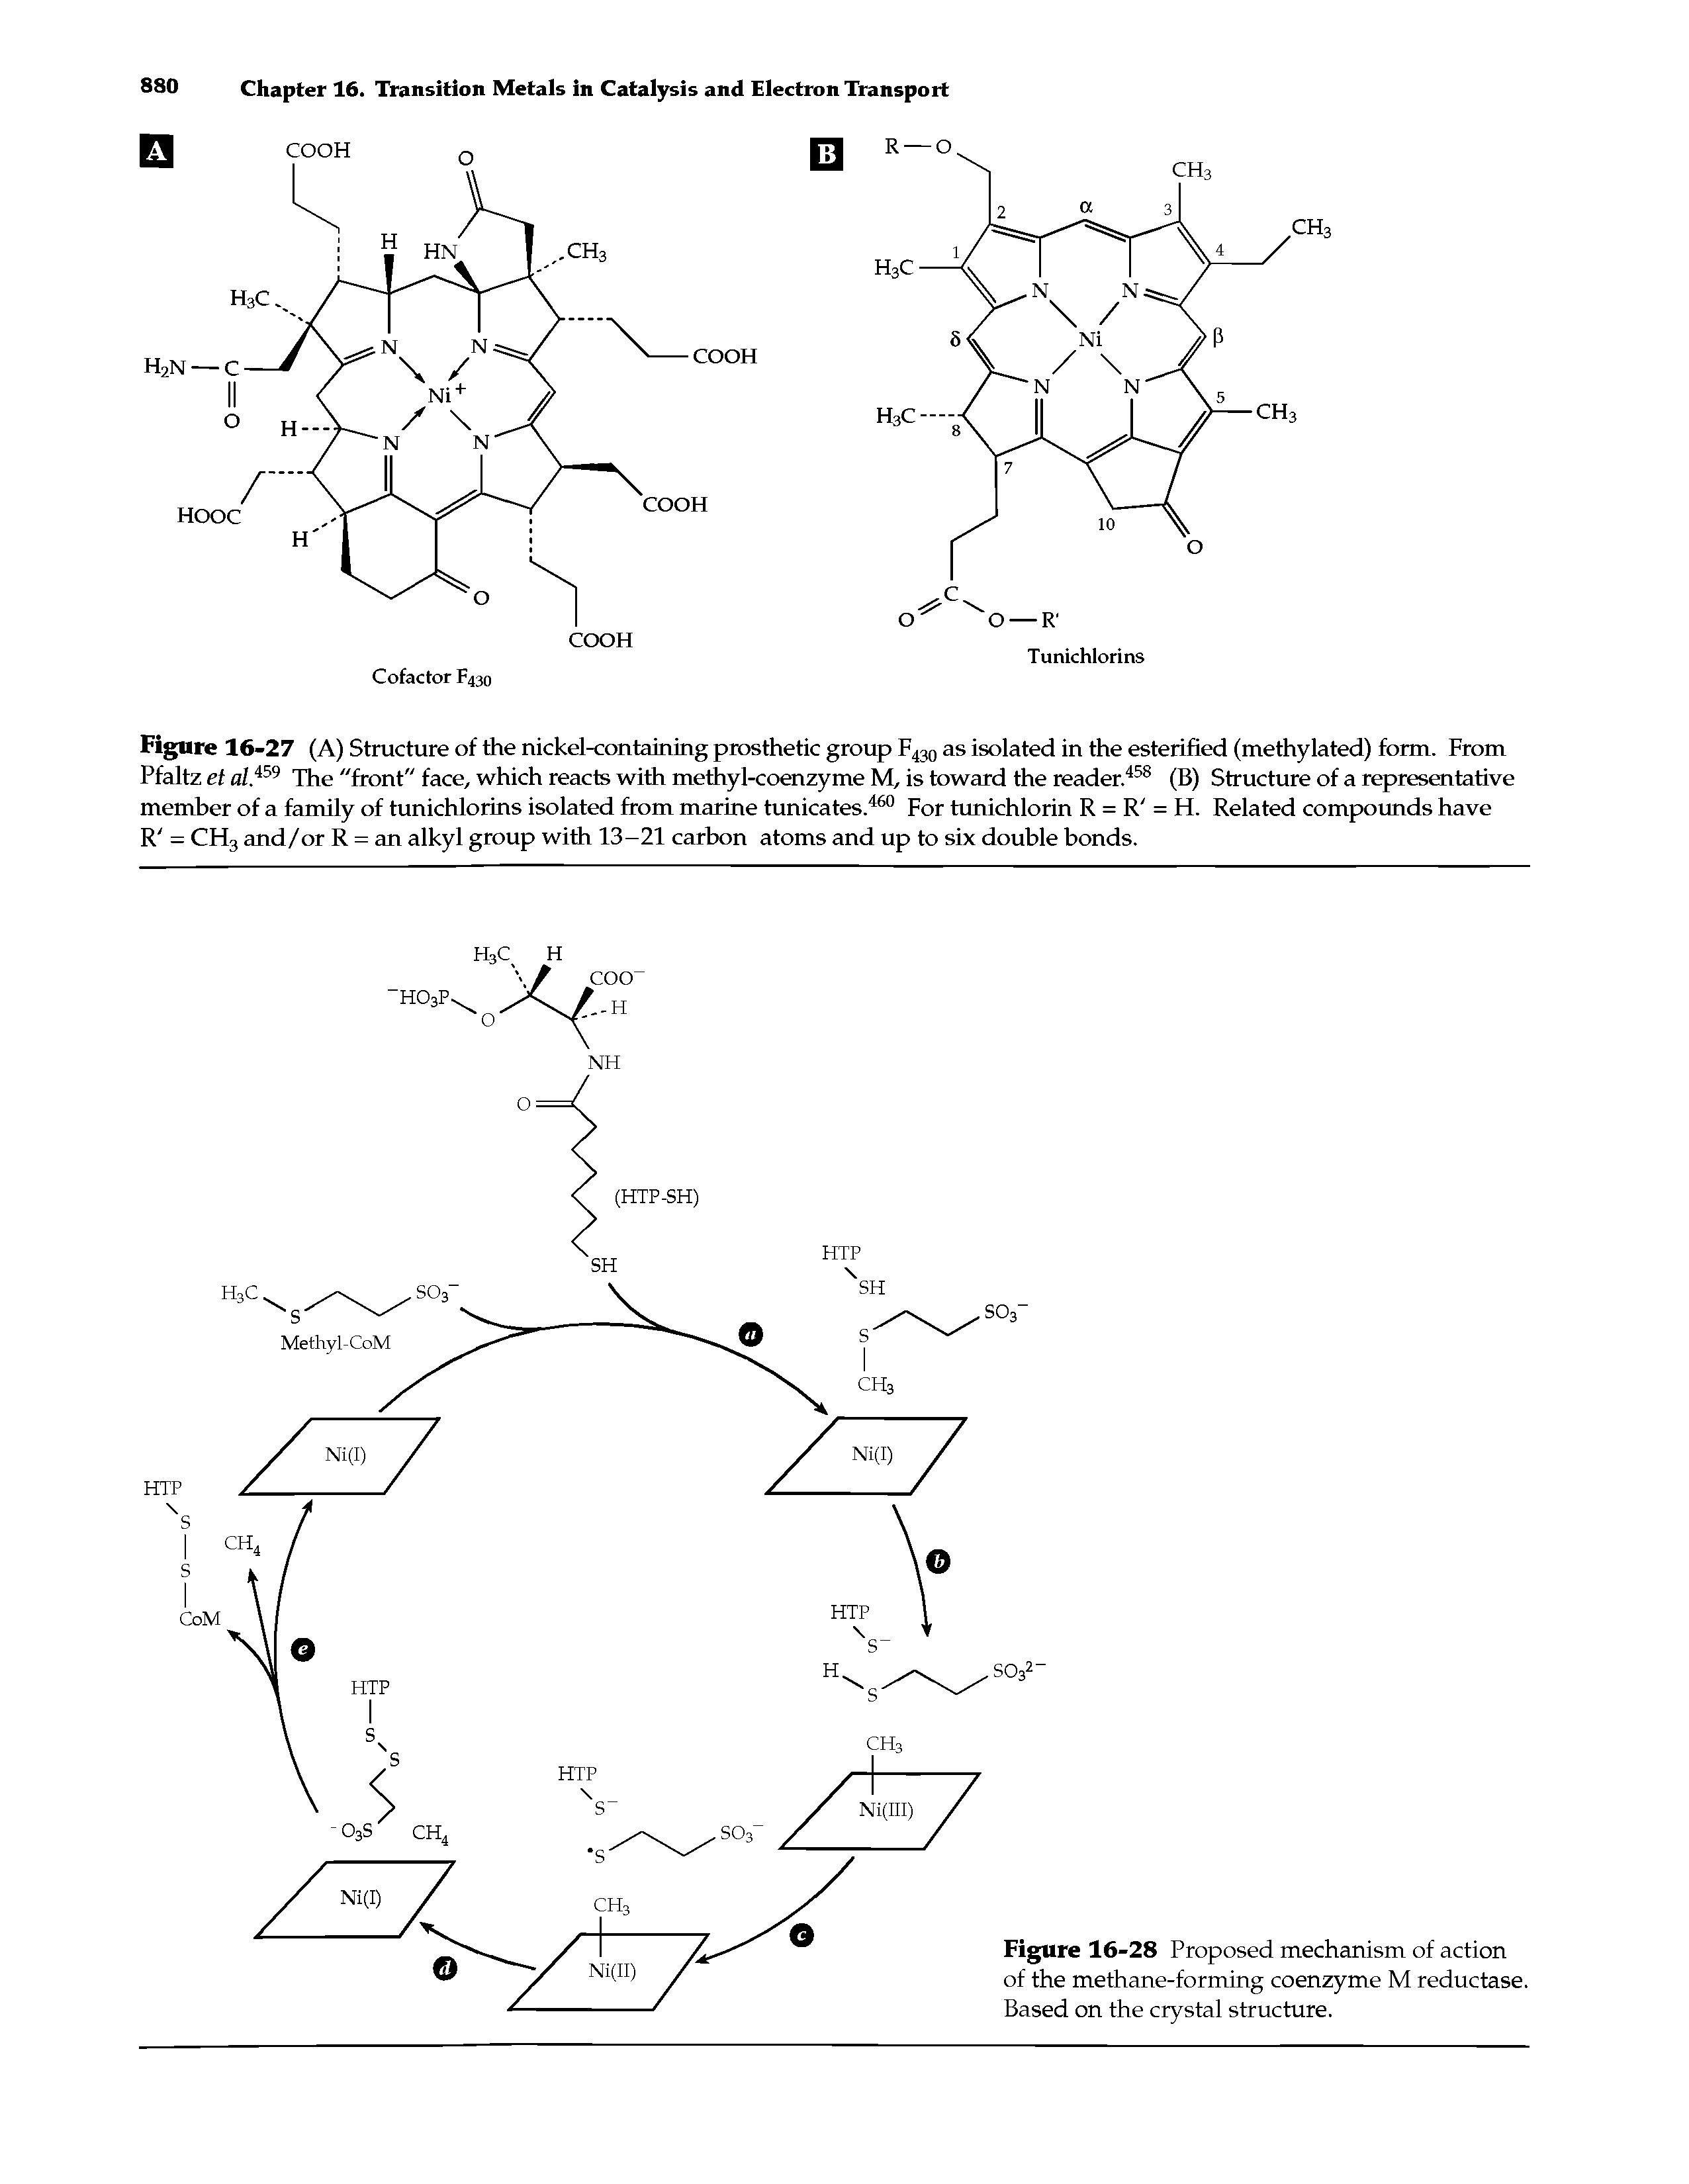 Figure 16-27 (A) Structure of the nickel-containing prosthetic group F430 as isolated in the esterified (methylated) form. From Pfaltz et al.i59 The "front" face, which reacts with methyl-coenzyme M, is toward the reader.458 (B) Structure of a representative member of a family of tunichlorins isolated from marine tunicates.460 For tunichlorin R = R = H. Related compounds have R = CH3 and/or R = an alkyl group with 13-21 carbon atoms and up to six double bonds.